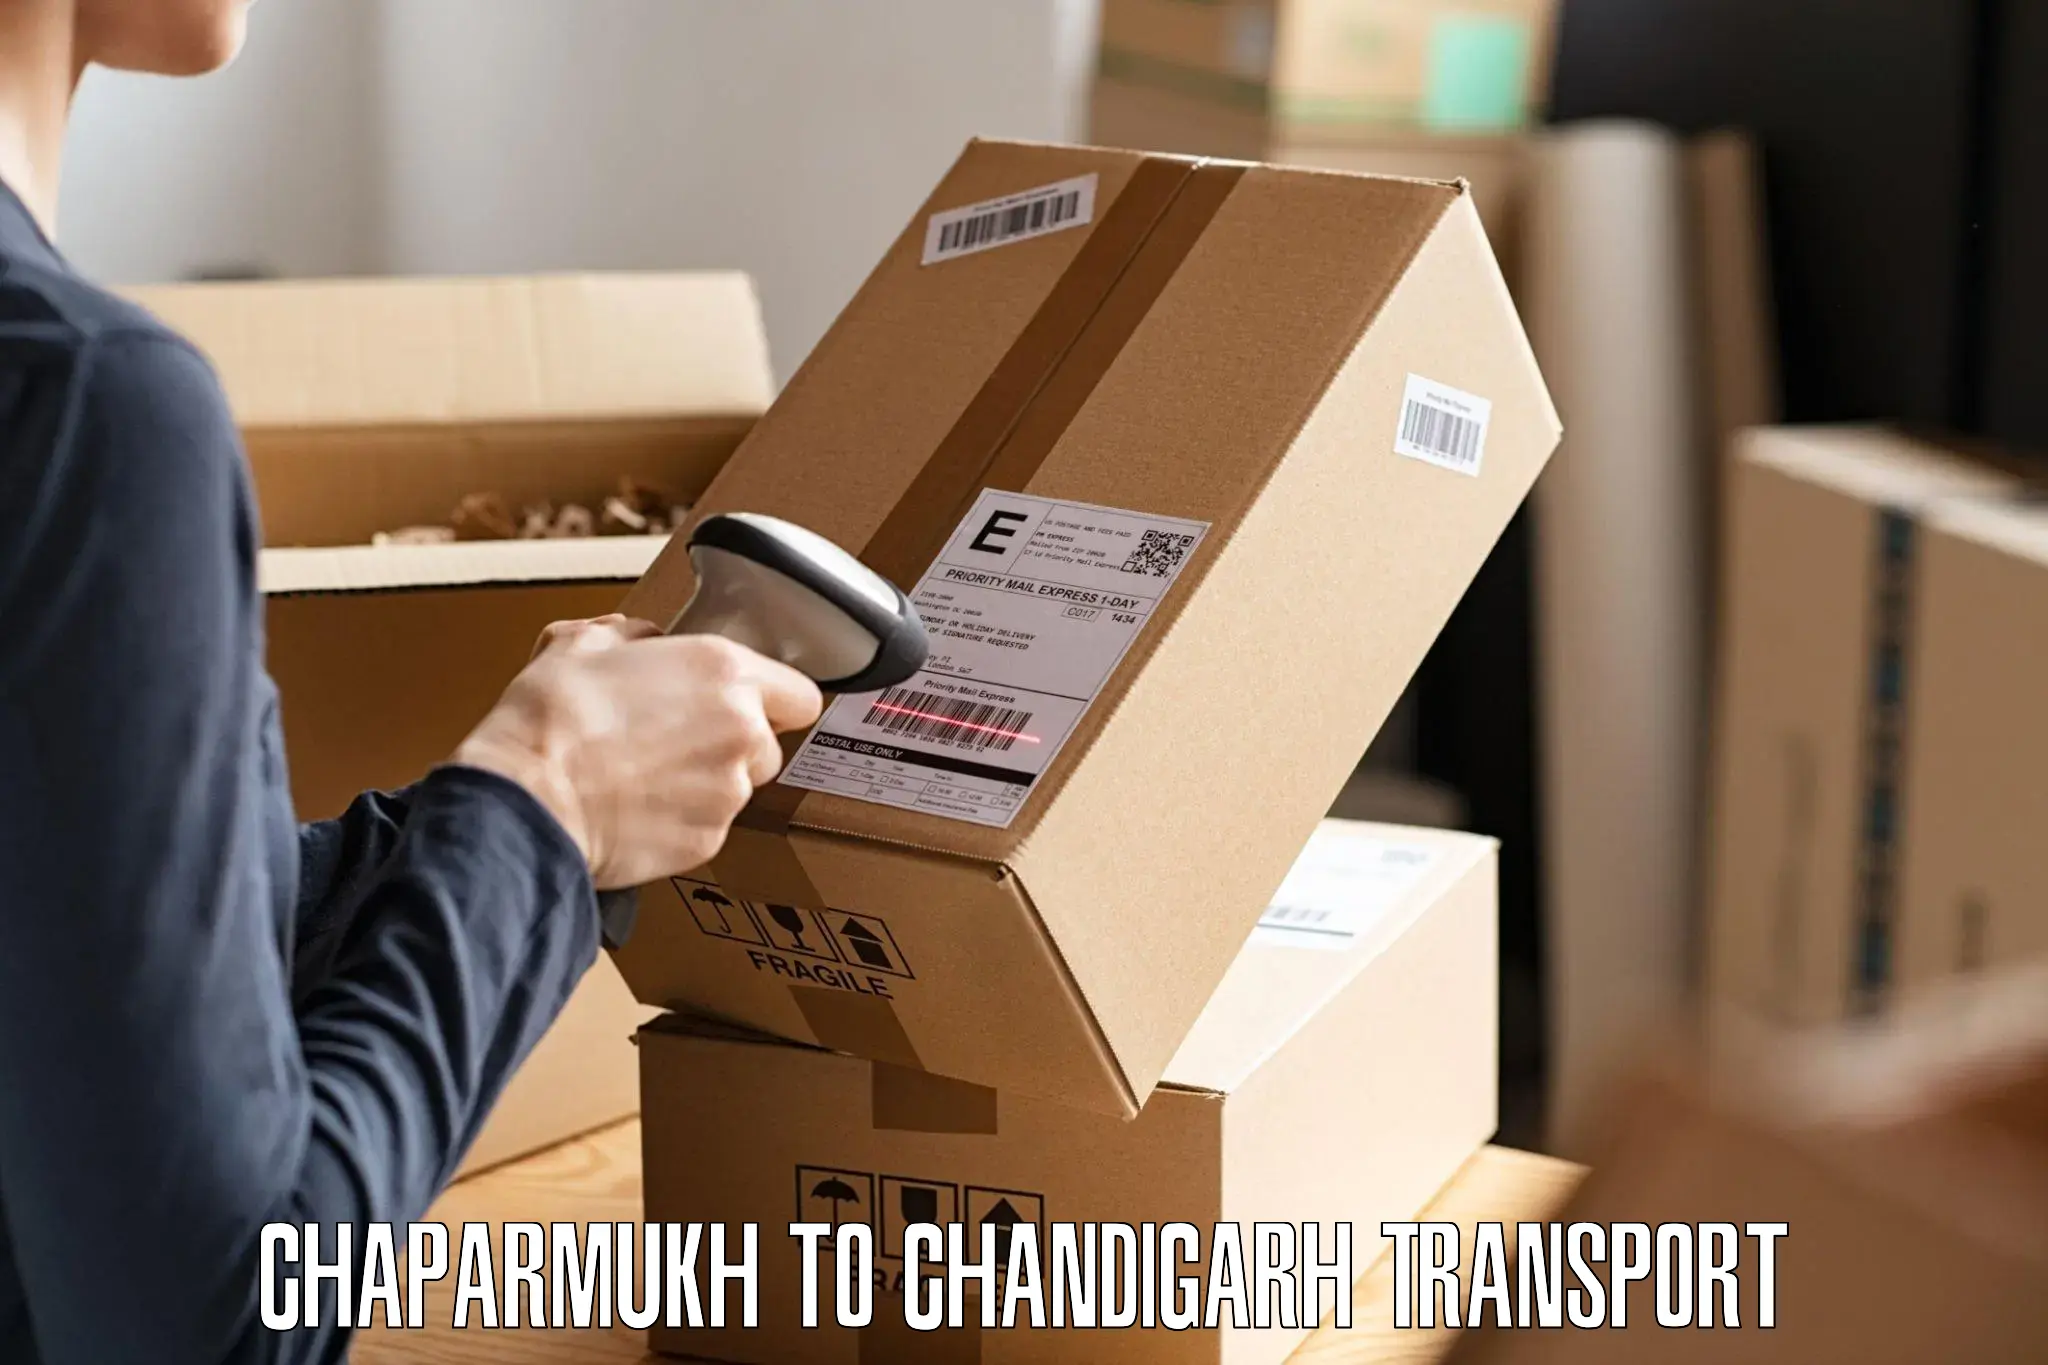 Daily parcel service transport Chaparmukh to Chandigarh